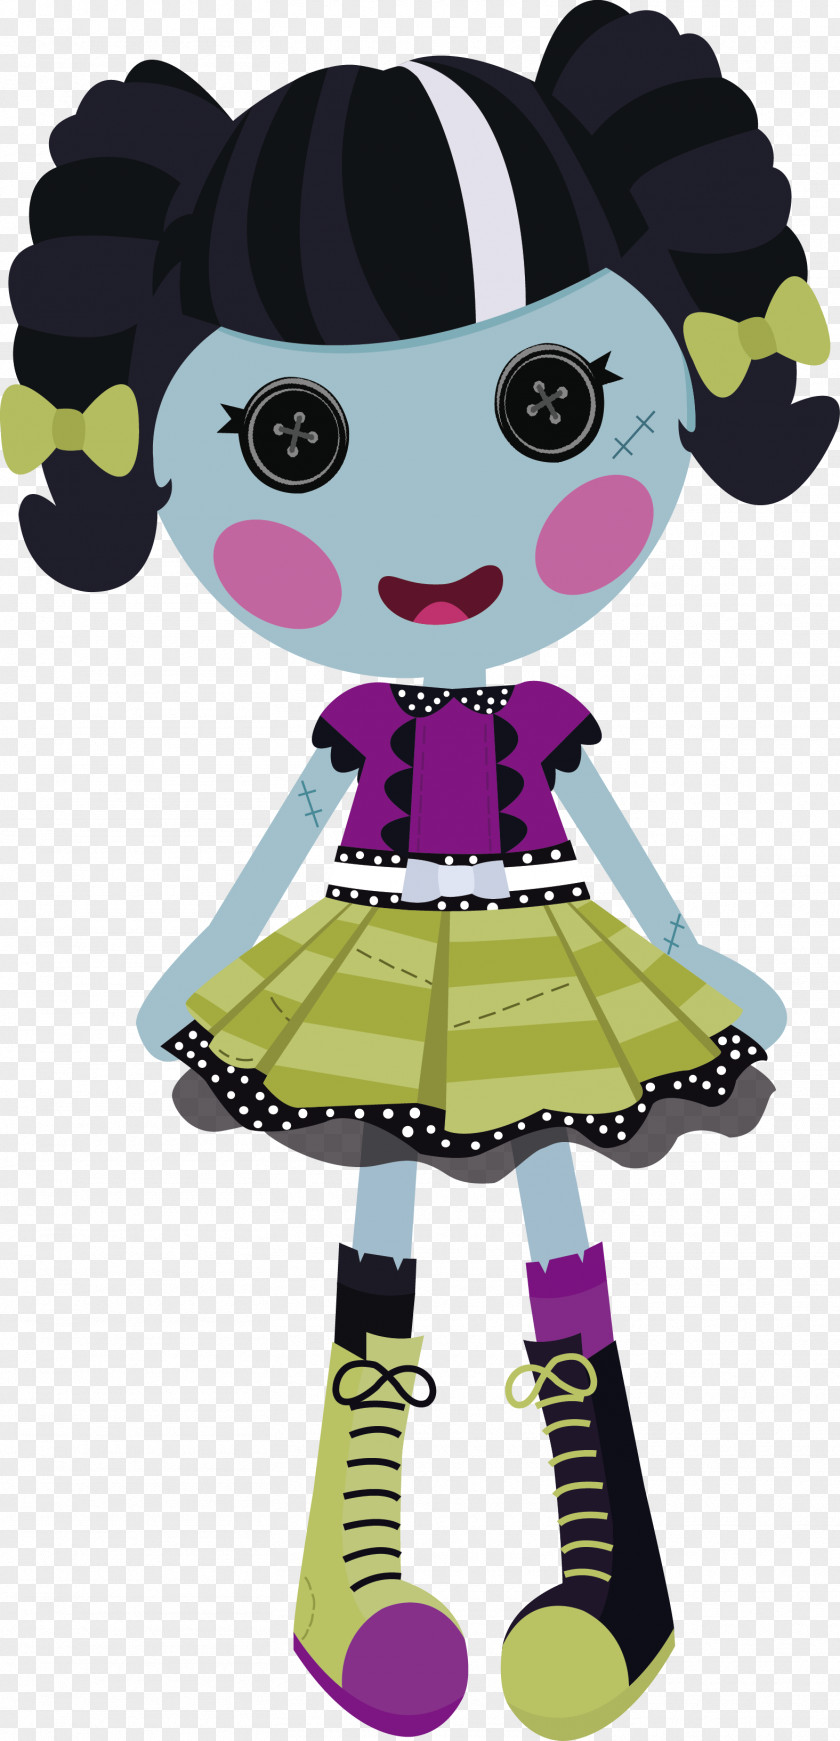 Stitched Vector Lalaloopsy Stitch Sewing Doll PNG